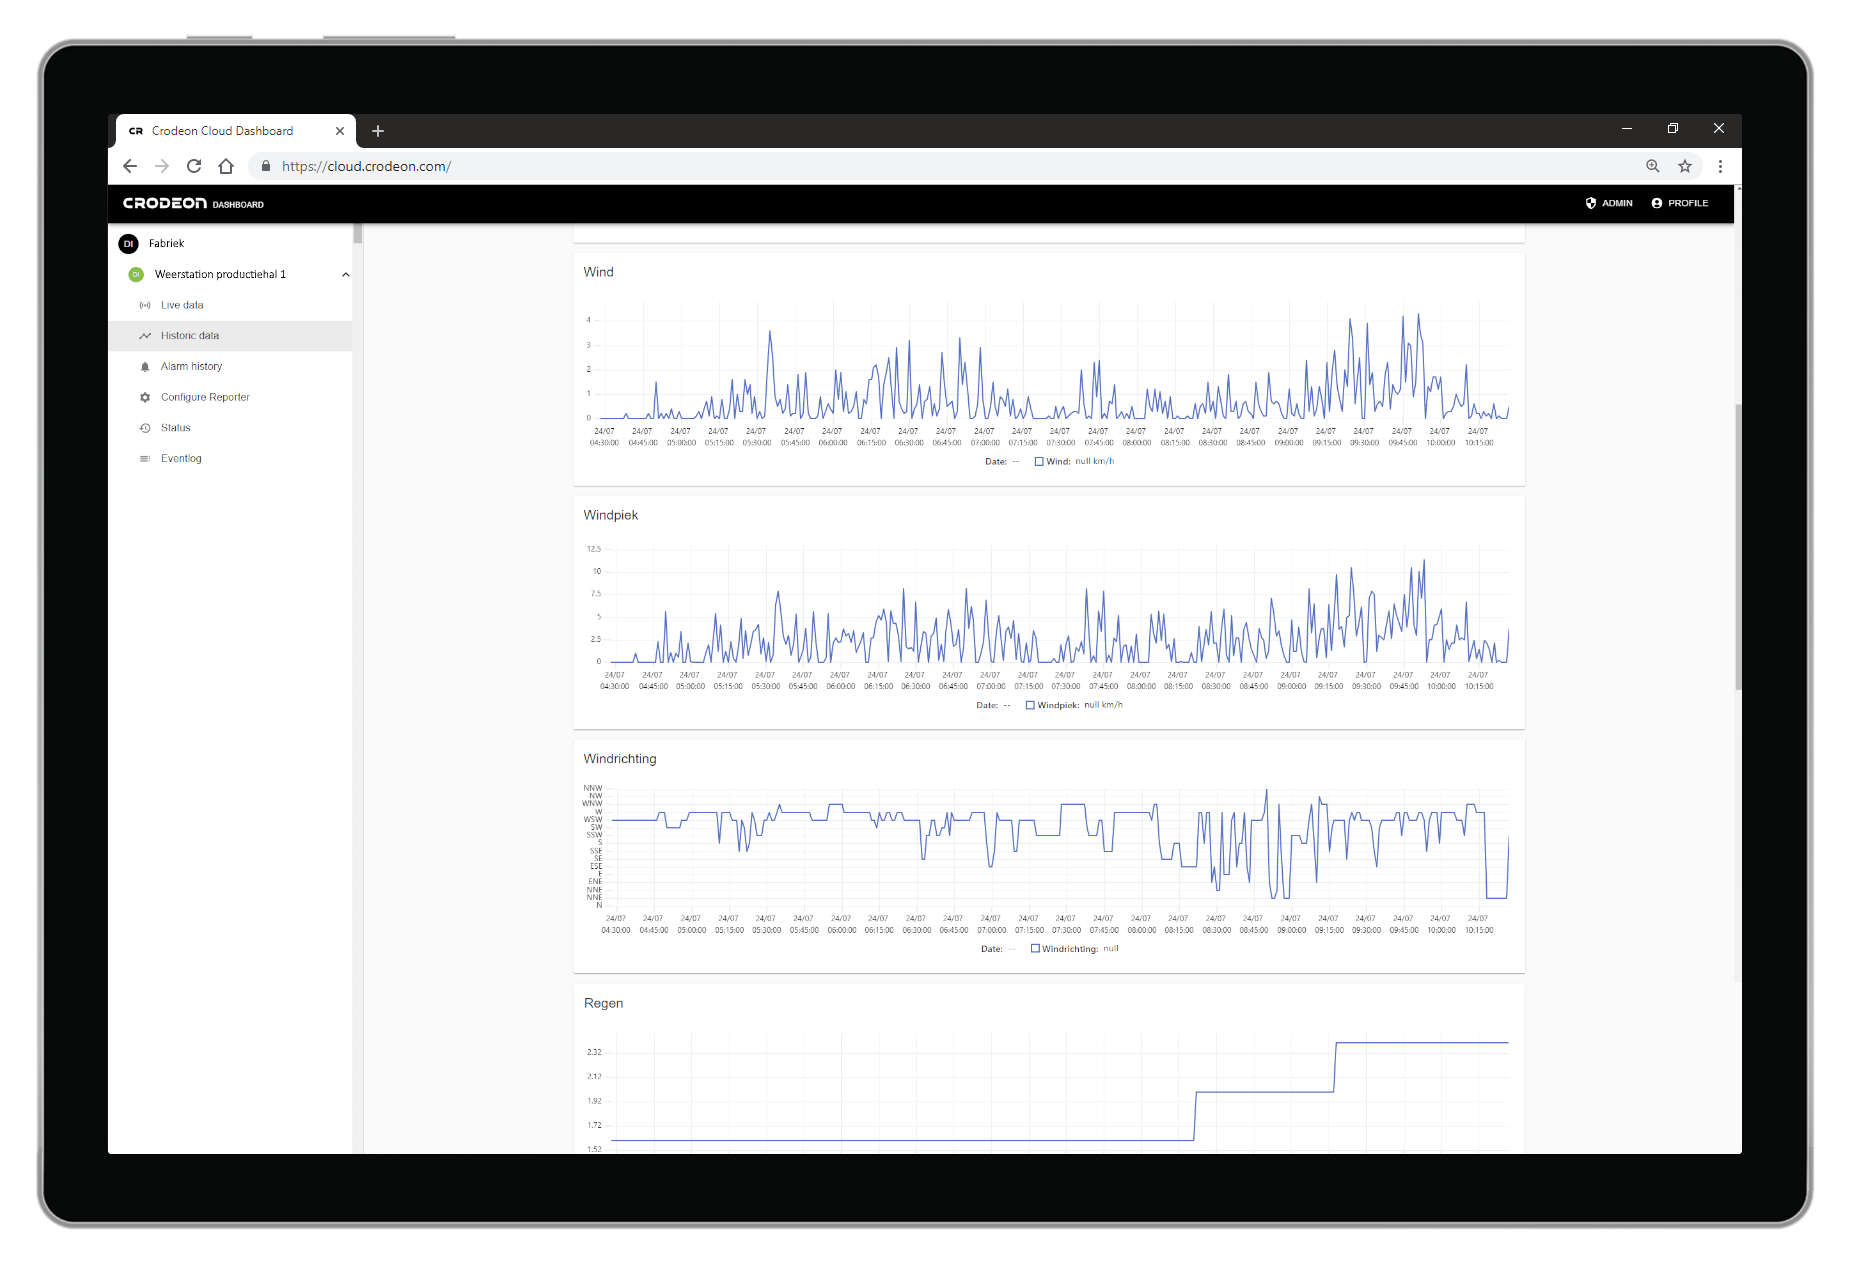 The Crodeon Dashboard showing wind measurements